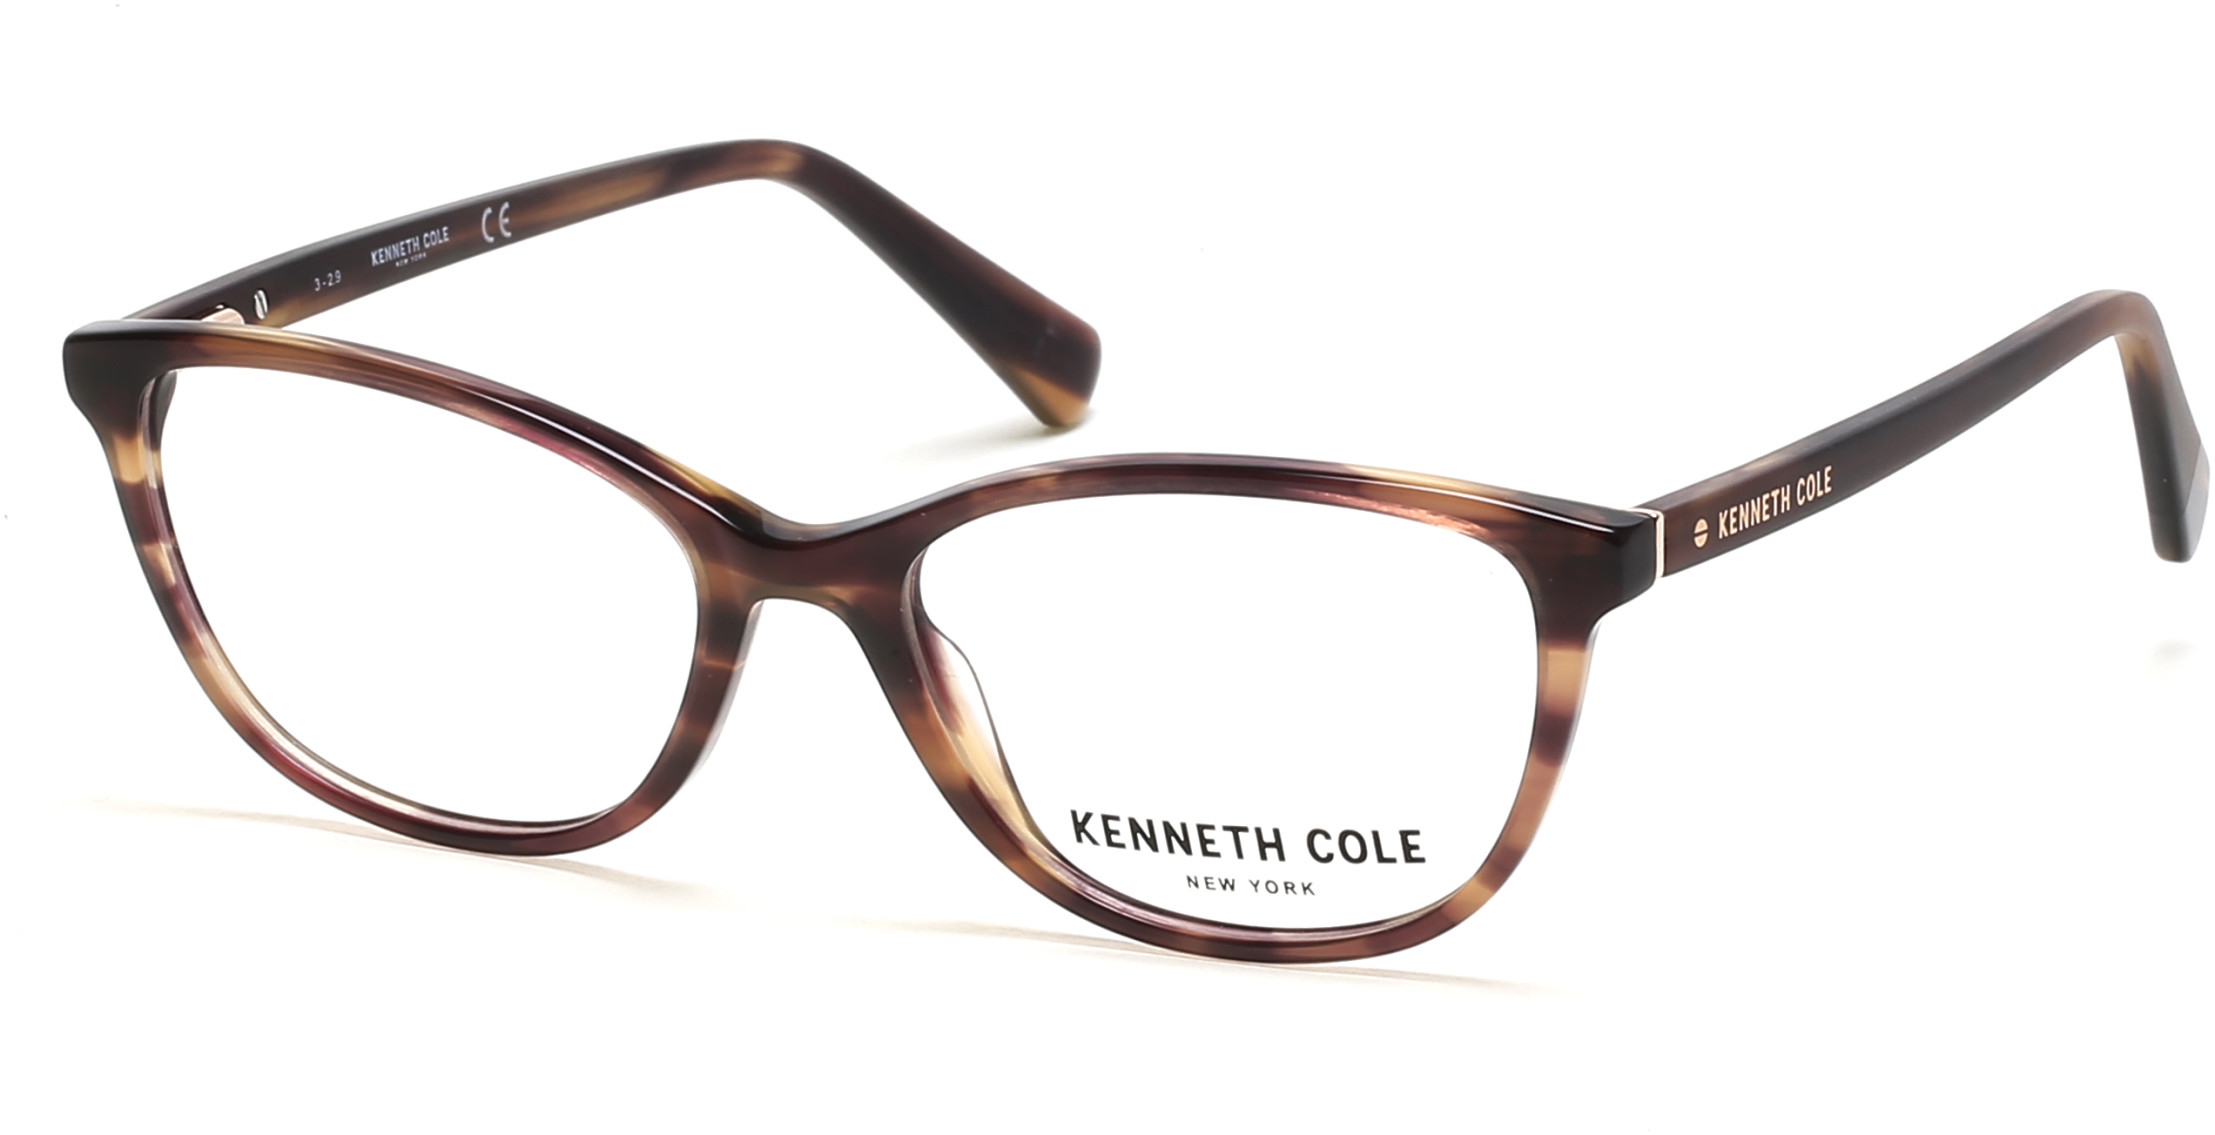 KENNETH COLE NY 0308 062